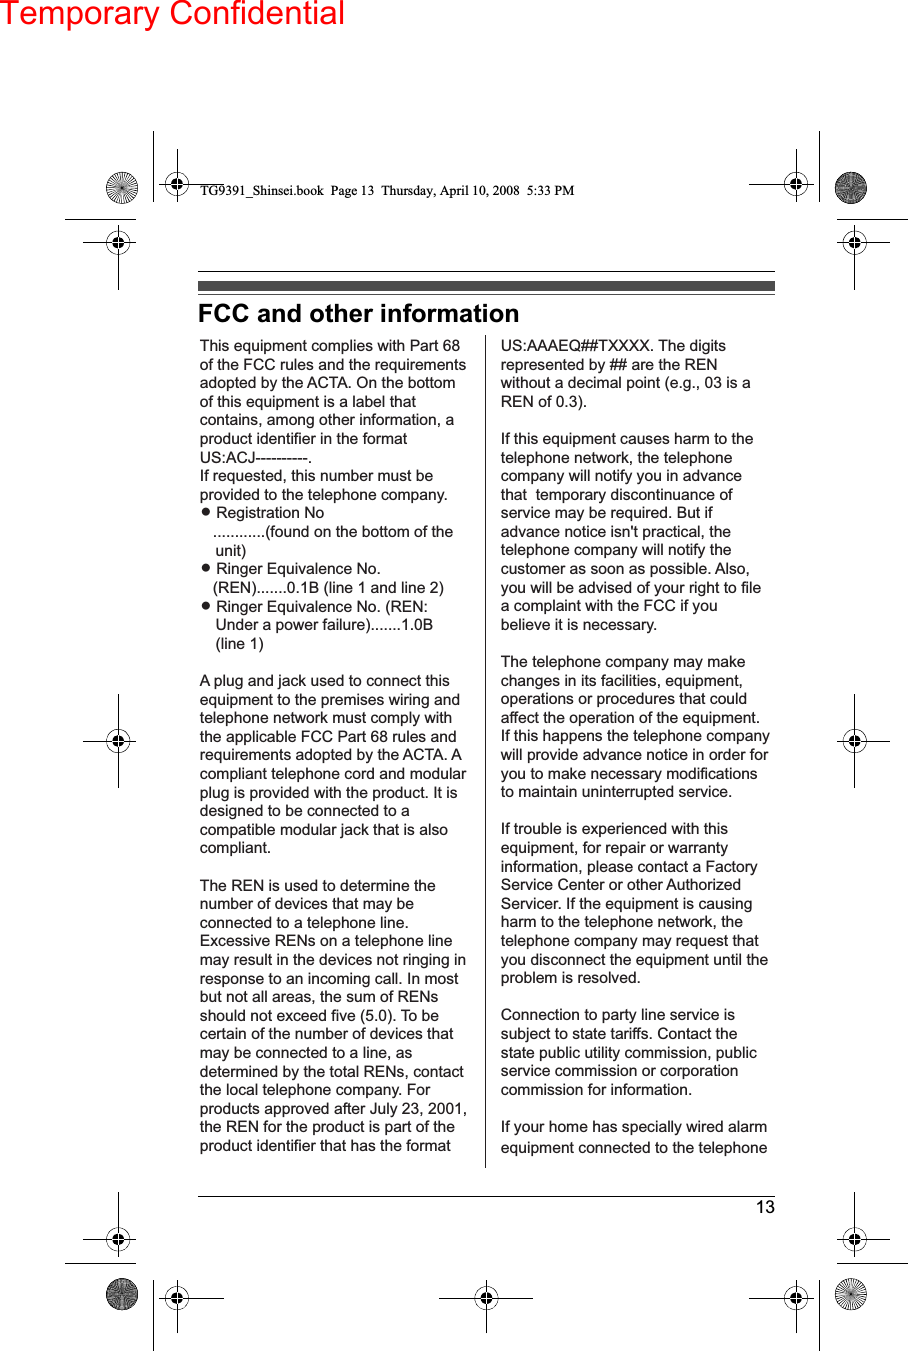 Temporary Confidential13FCC and other informationThis equipment complies with Part 68 of the FCC rules and the requirements adopted by the ACTA. On the bottom of this equipment is a label that contains, among other information, a product identifier in the format US:ACJ----------.If requested, this number must be provided to the telephone company.L Registration No   ............(found on the bottom of the unit)L Ringer Equivalence No.   (REN).......0.1B (line 1 and line 2)L Ringer Equivalence No. (REN: Under a power failure).......1.0B (line 1)A plug and jack used to connect this equipment to the premises wiring and telephone network must comply with the applicable FCC Part 68 rules and requirements adopted by the ACTA. A compliant telephone cord and modular plug is provided with the product. It is designed to be connected to a compatible modular jack that is also compliant.The REN is used to determine the number of devices that may be connected to a telephone line. Excessive RENs on a telephone line may result in the devices not ringing in response to an incoming call. In most but not all areas, the sum of RENs should not exceed five (5.0). To be certain of the number of devices that may be connected to a line, as determined by the total RENs, contact the local telephone company. For products approved after July 23, 2001, the REN for the product is part of the product identifier that has the format US:AAAEQ##TXXXX. The digits represented by ## are the REN without a decimal point (e.g., 03 is a REN of 0.3).If this equipment causes harm to the telephone network, the telephone company will notify you in advance that  temporary discontinuance of service may be required. But if advance notice isn&apos;t practical, the telephone company will notify the customer as soon as possible. Also, you will be advised of your right to file a complaint with the FCC if you believe it is necessary.The telephone company may make changes in its facilities, equipment, operations or procedures that could affect the operation of the equipment. If this happens the telephone company will provide advance notice in order for you to make necessary modifications to maintain uninterrupted service.If trouble is experienced with this equipment, for repair or warranty information, please contact a Factory Service Center or other Authorized Servicer. If the equipment is causing harm to the telephone network, the telephone company may request that you disconnect the equipment until the problem is resolved.Connection to party line service is subject to state tariffs. Contact the state public utility commission, public service commission or corporation commission for information.If your home has specially wired alarm equipment connected to the telephoneTG9391_Shinsei.book  Page 13  Thursday, April 10, 2008  5:33 PM